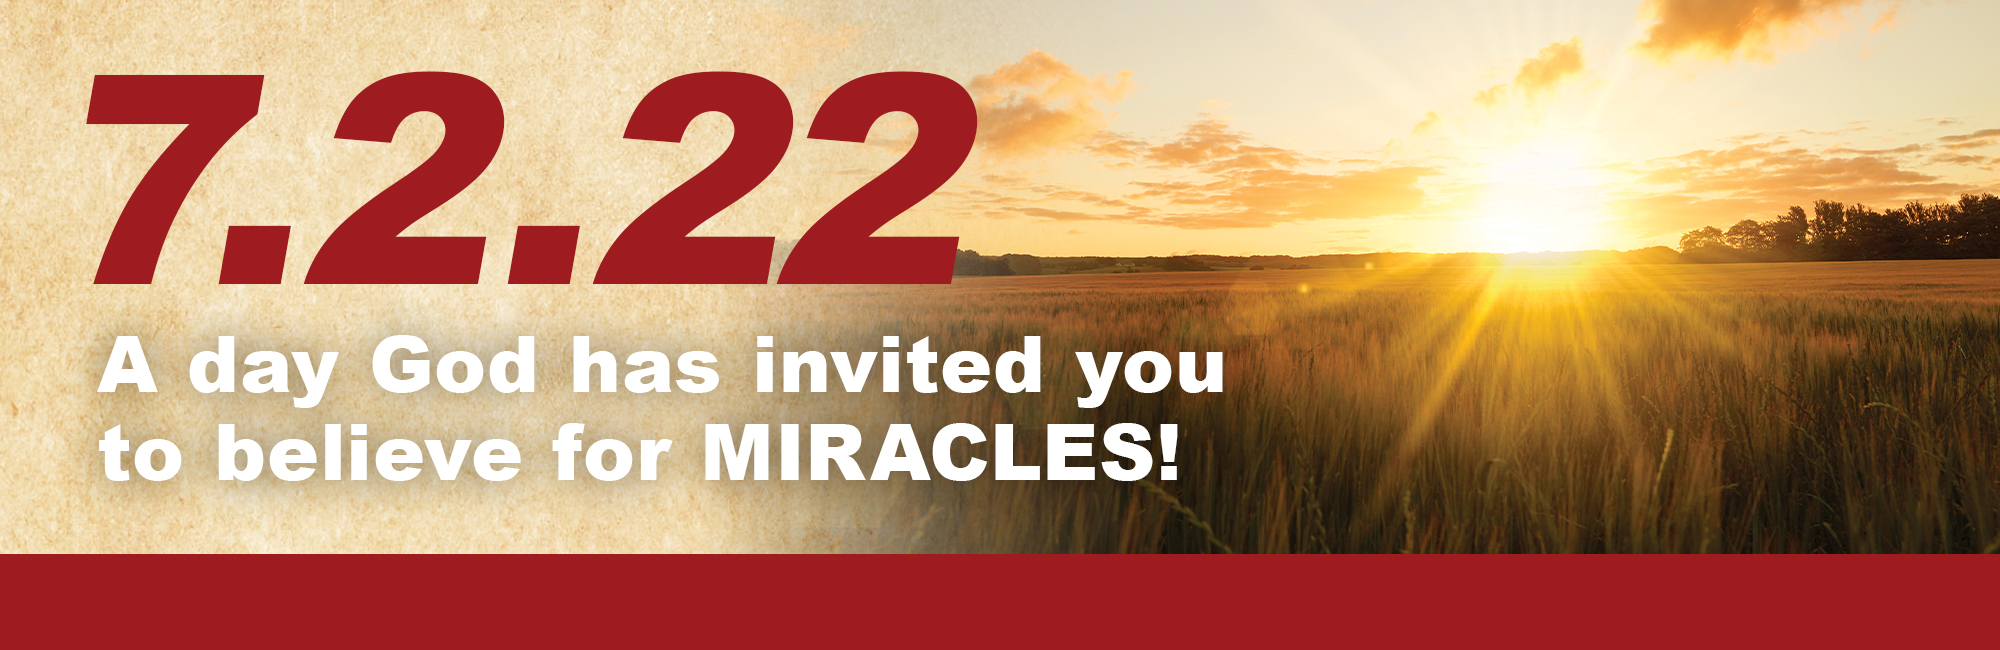 7/22/22 A day God has invited you to believe for Miracles!